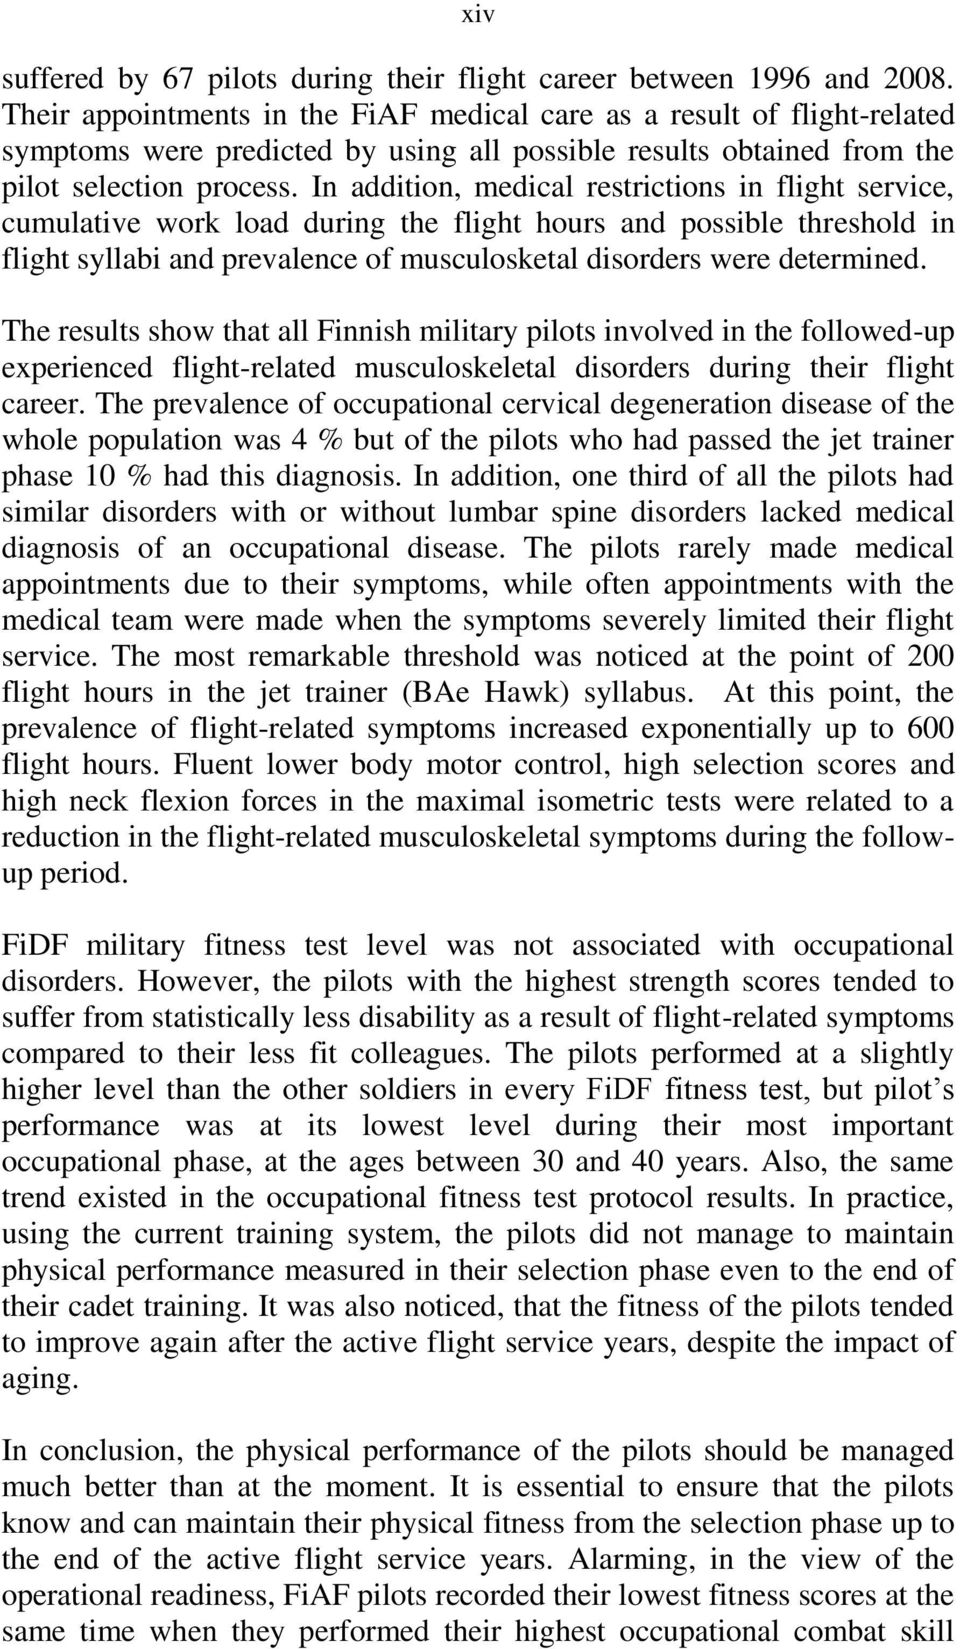 In addition, medical restrictions in flight service, cumulative work load during the flight hours and possible threshold in flight syllabi and prevalence of musculosketal disorders were determined.